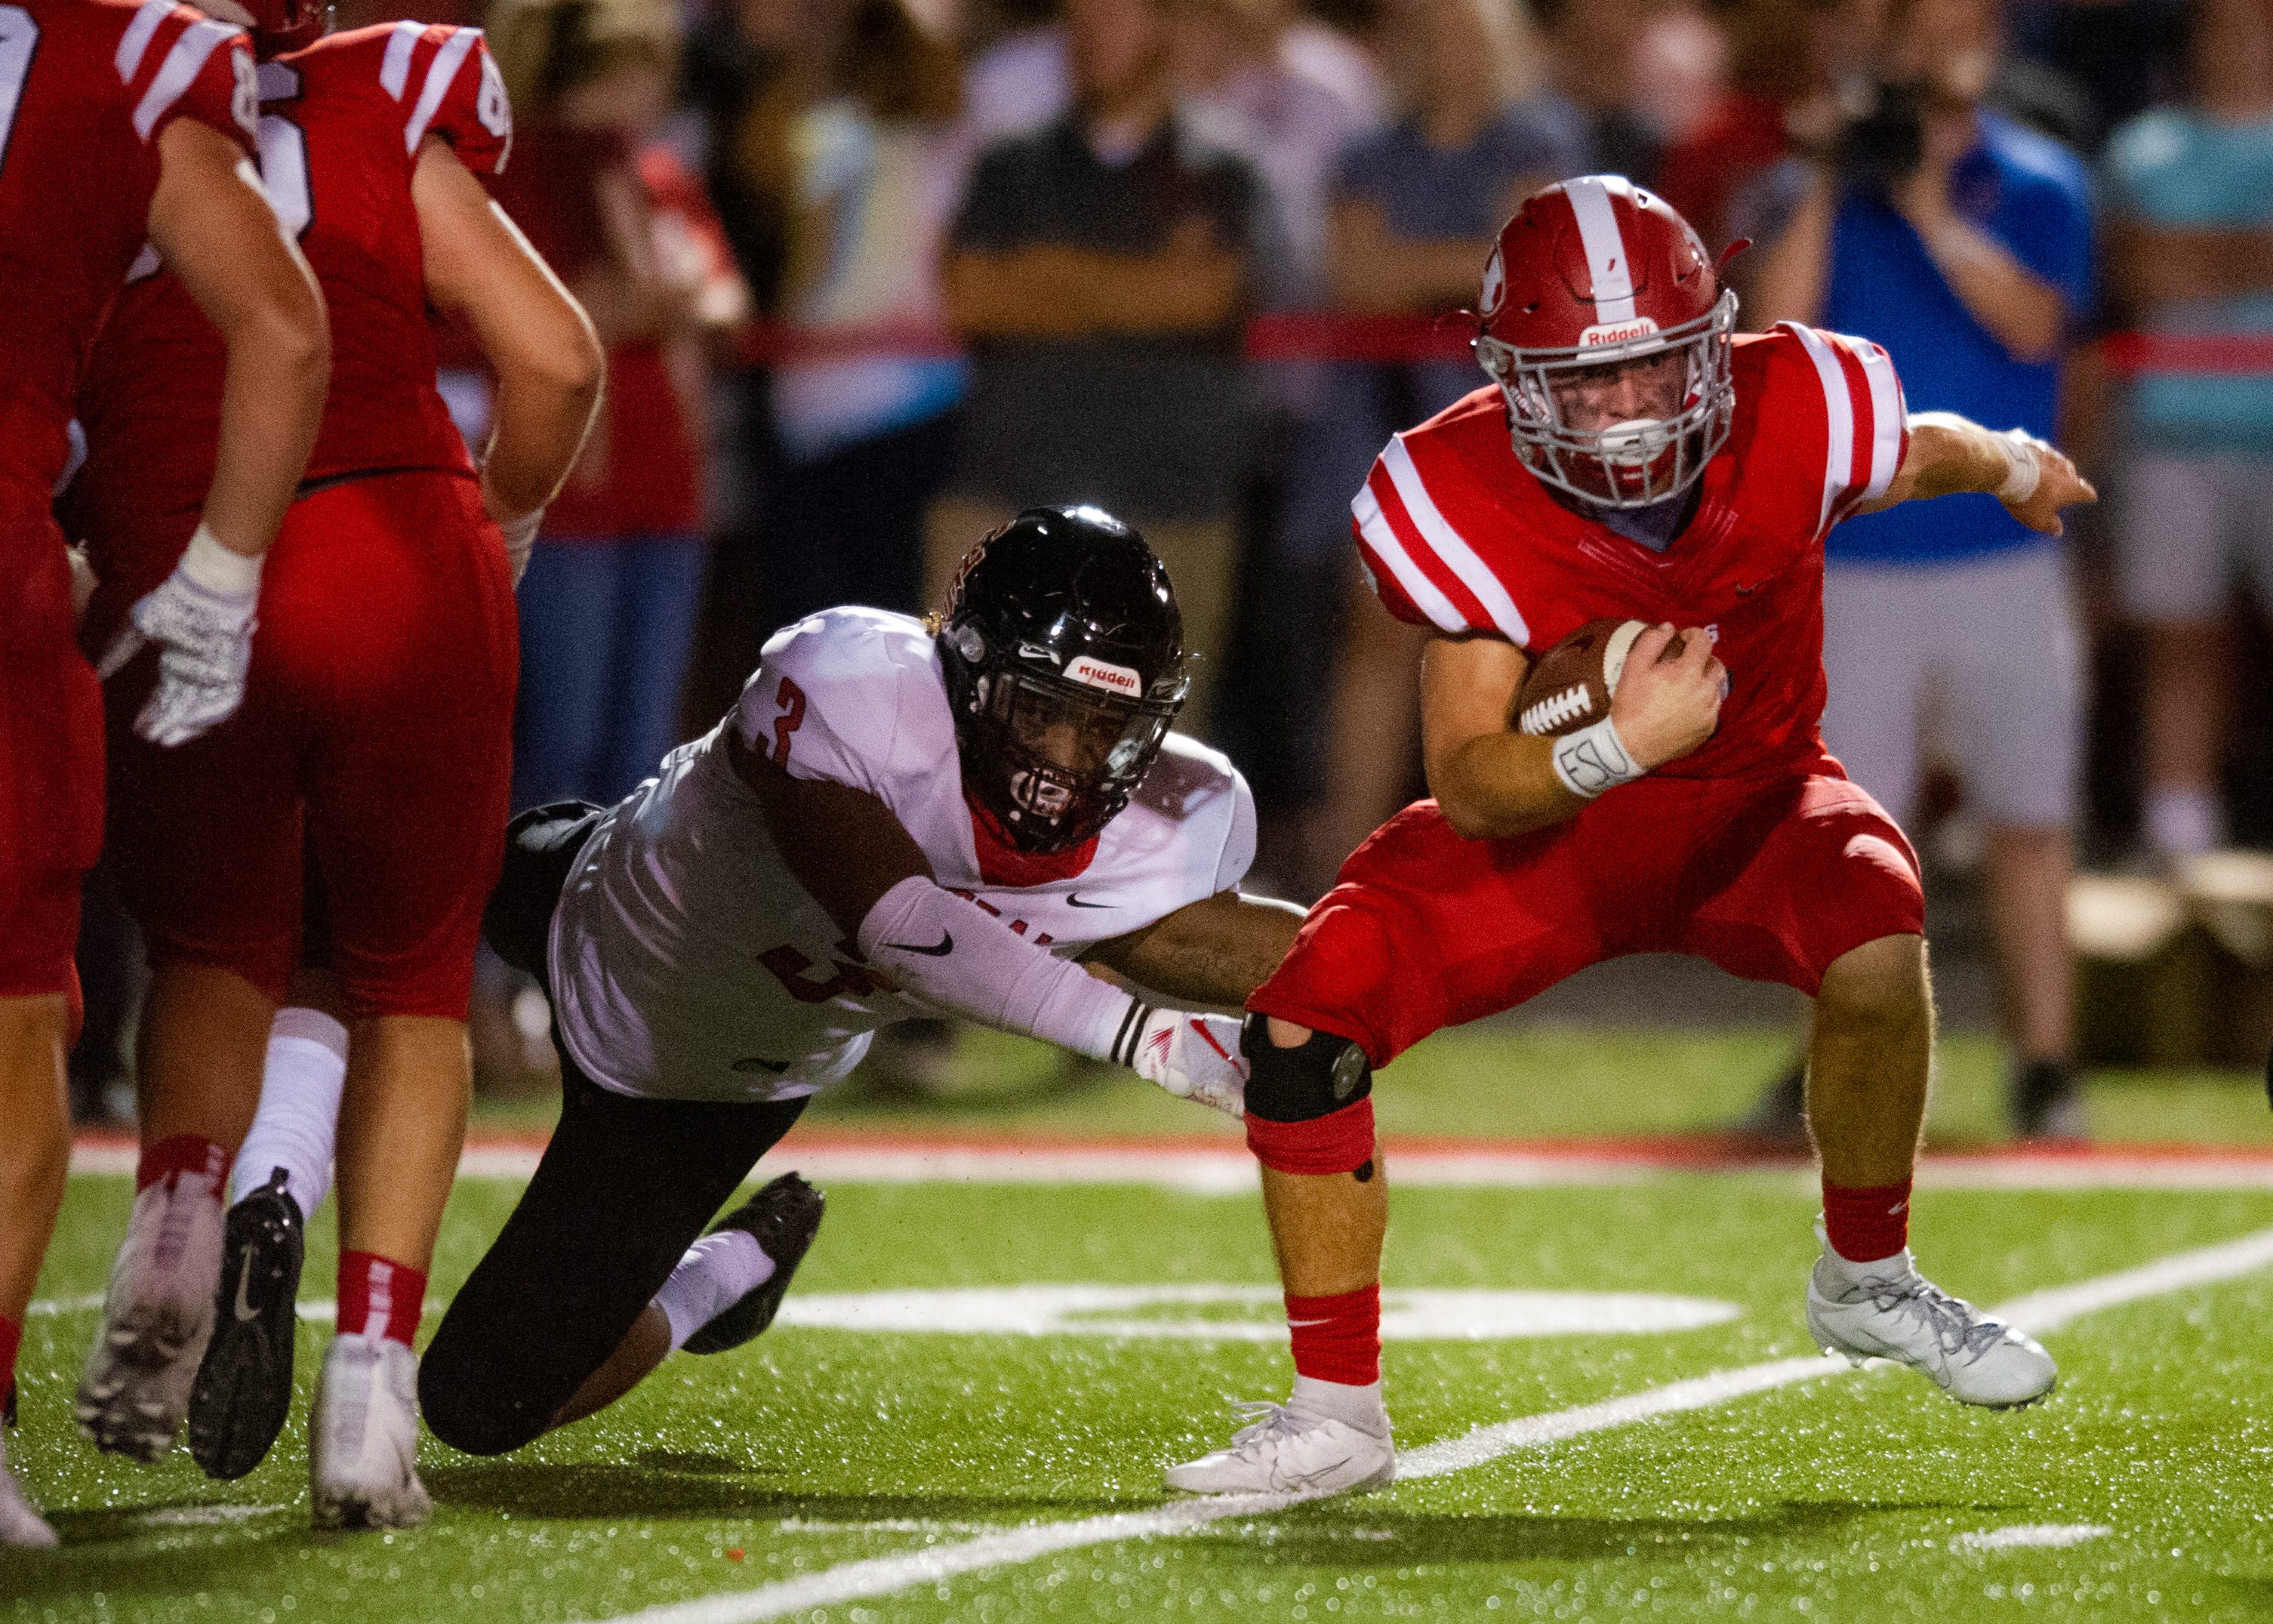 Central's Eunique Valentine (3) fails to grab Halls' Jake Parris (8) during the Halls and Central high school football game on Friday, October 4, 2019 at Halls High School.